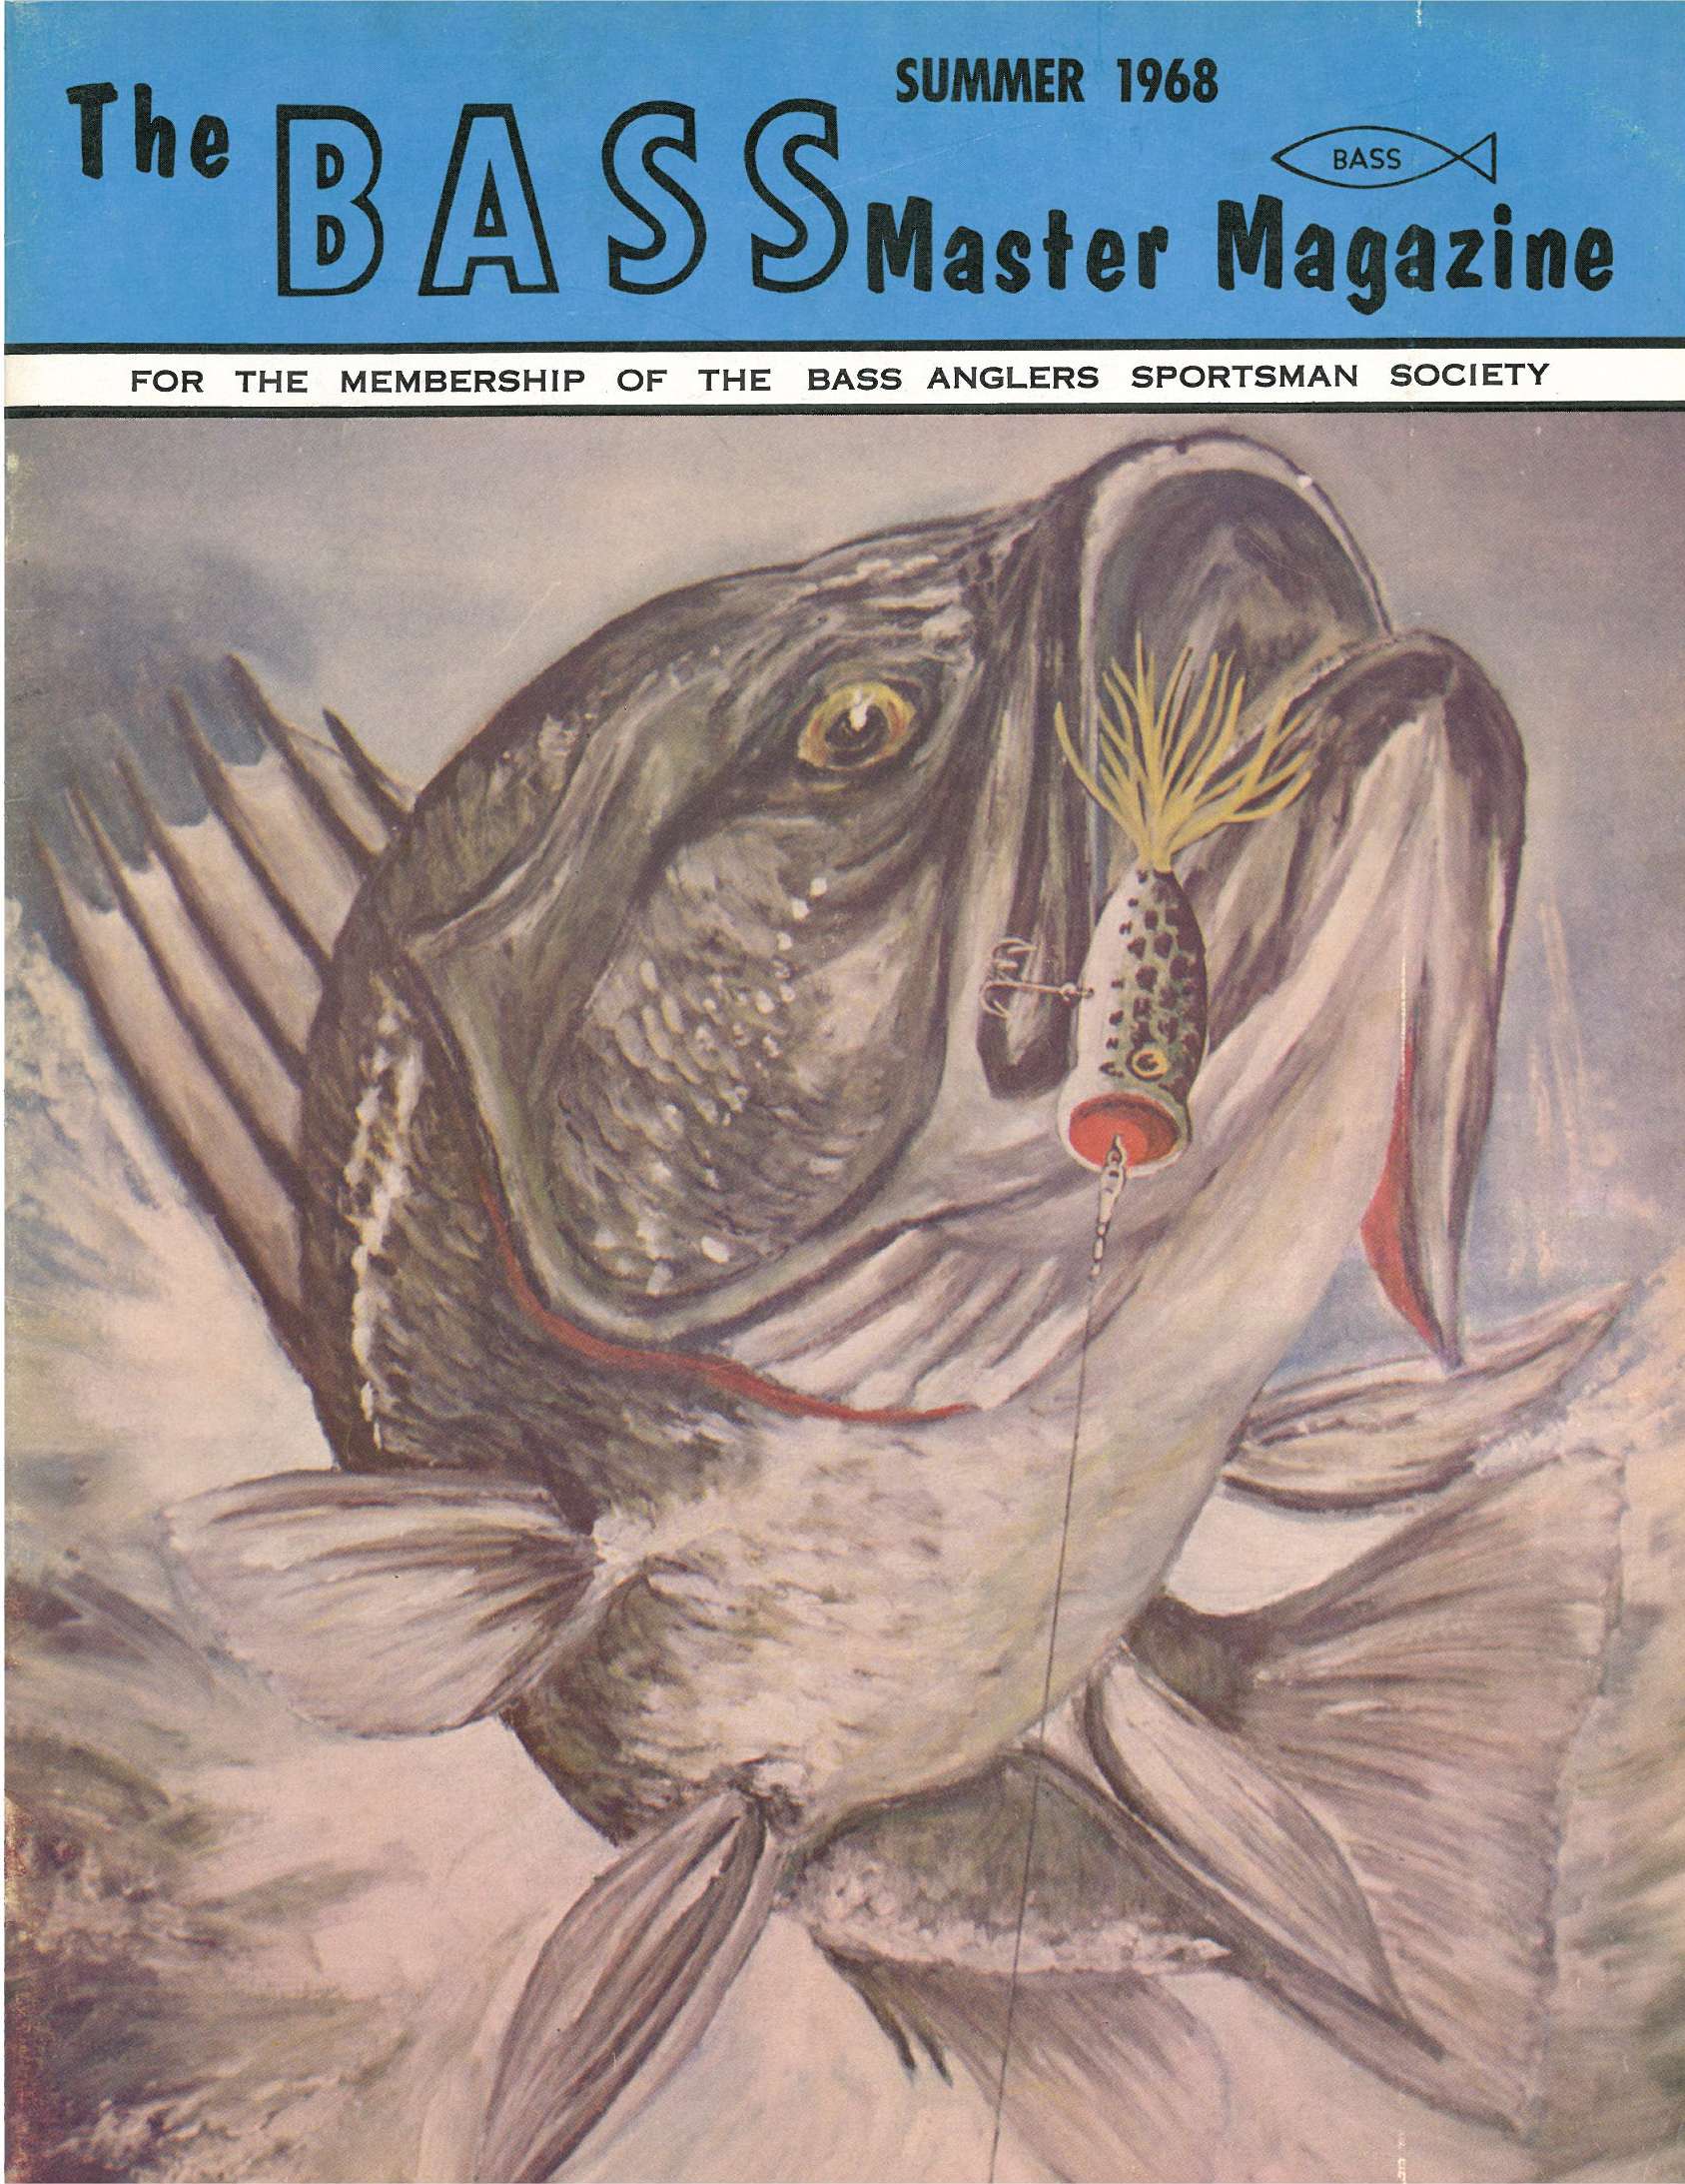 The next issue features a colorful painting as its cover image. When the Summer 1968 Bassmaster Magazine went to press, advertising sales had improved.